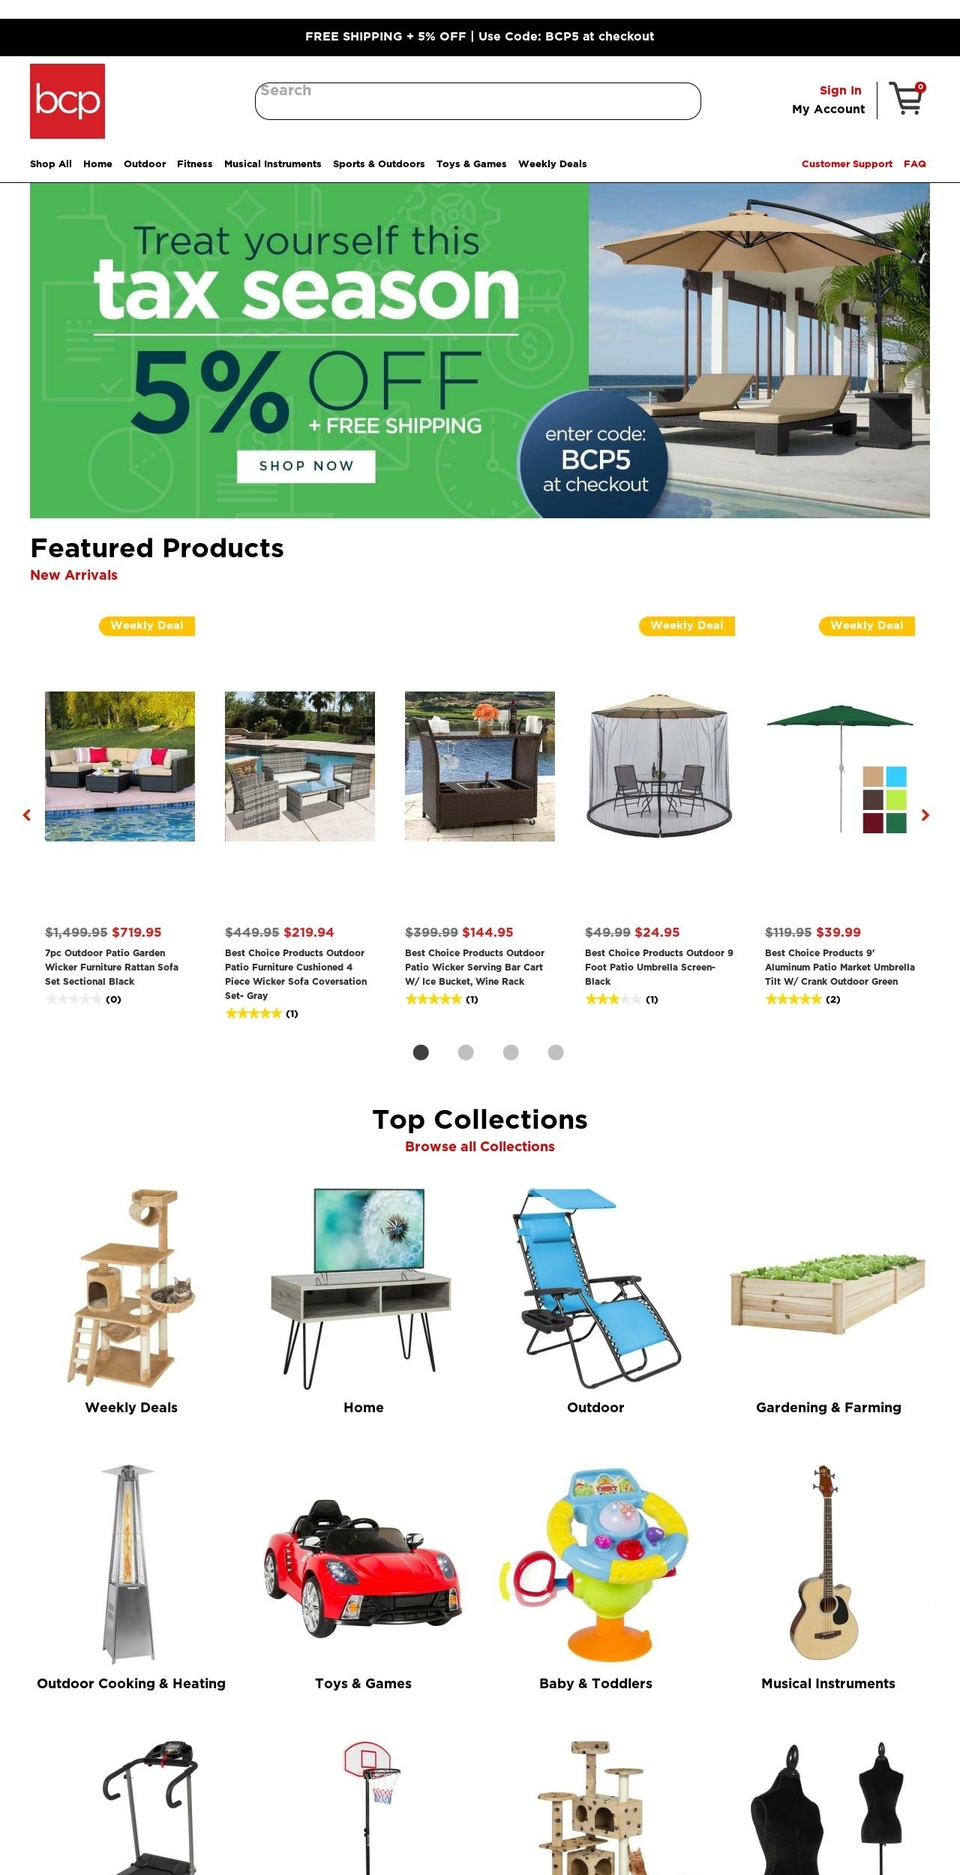 Dawn Shopify theme site example bestchoiceproducts.com